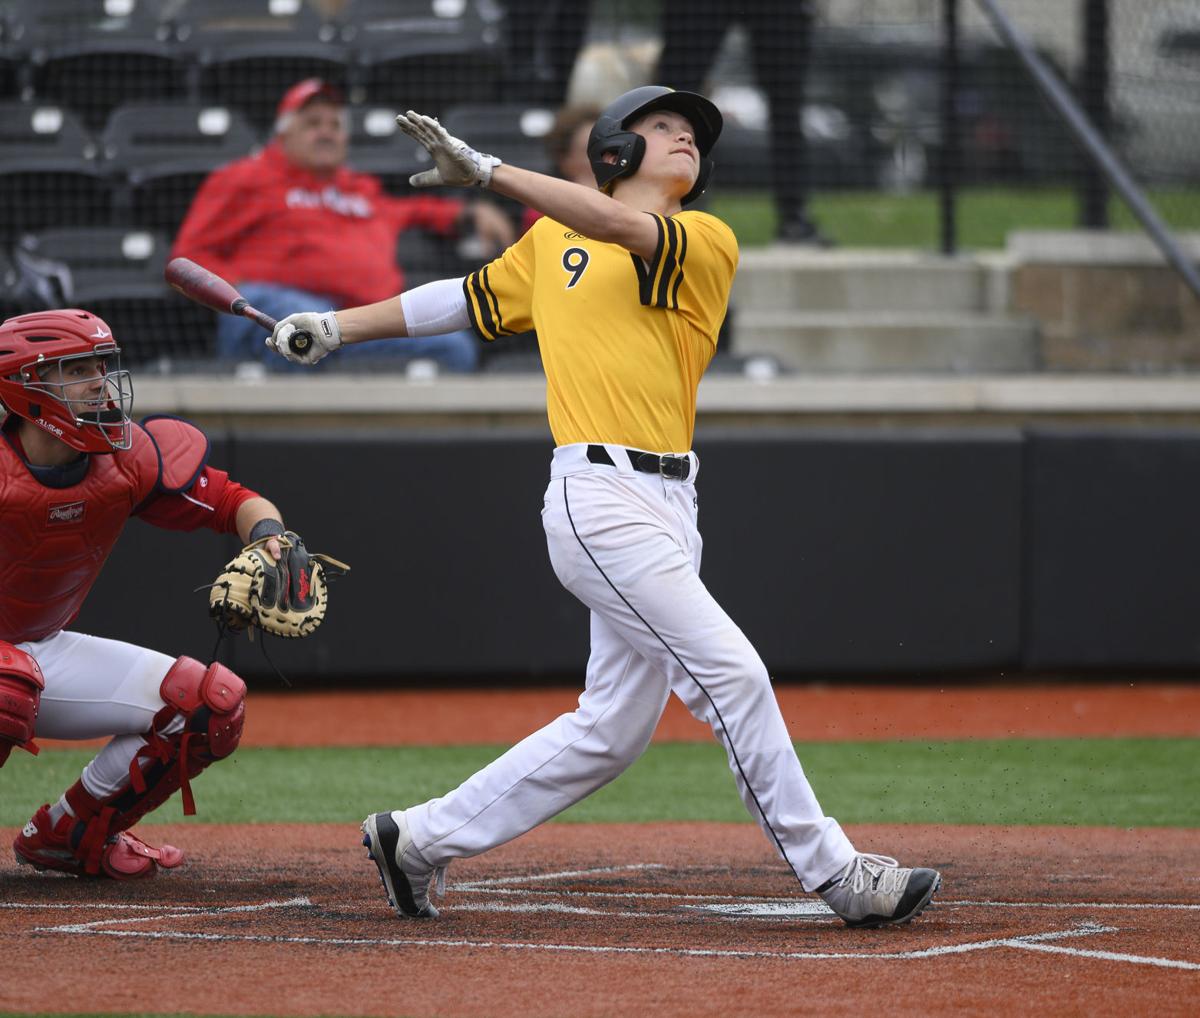 Chaminade rallies to beat Vianney in extra innings | High School ...